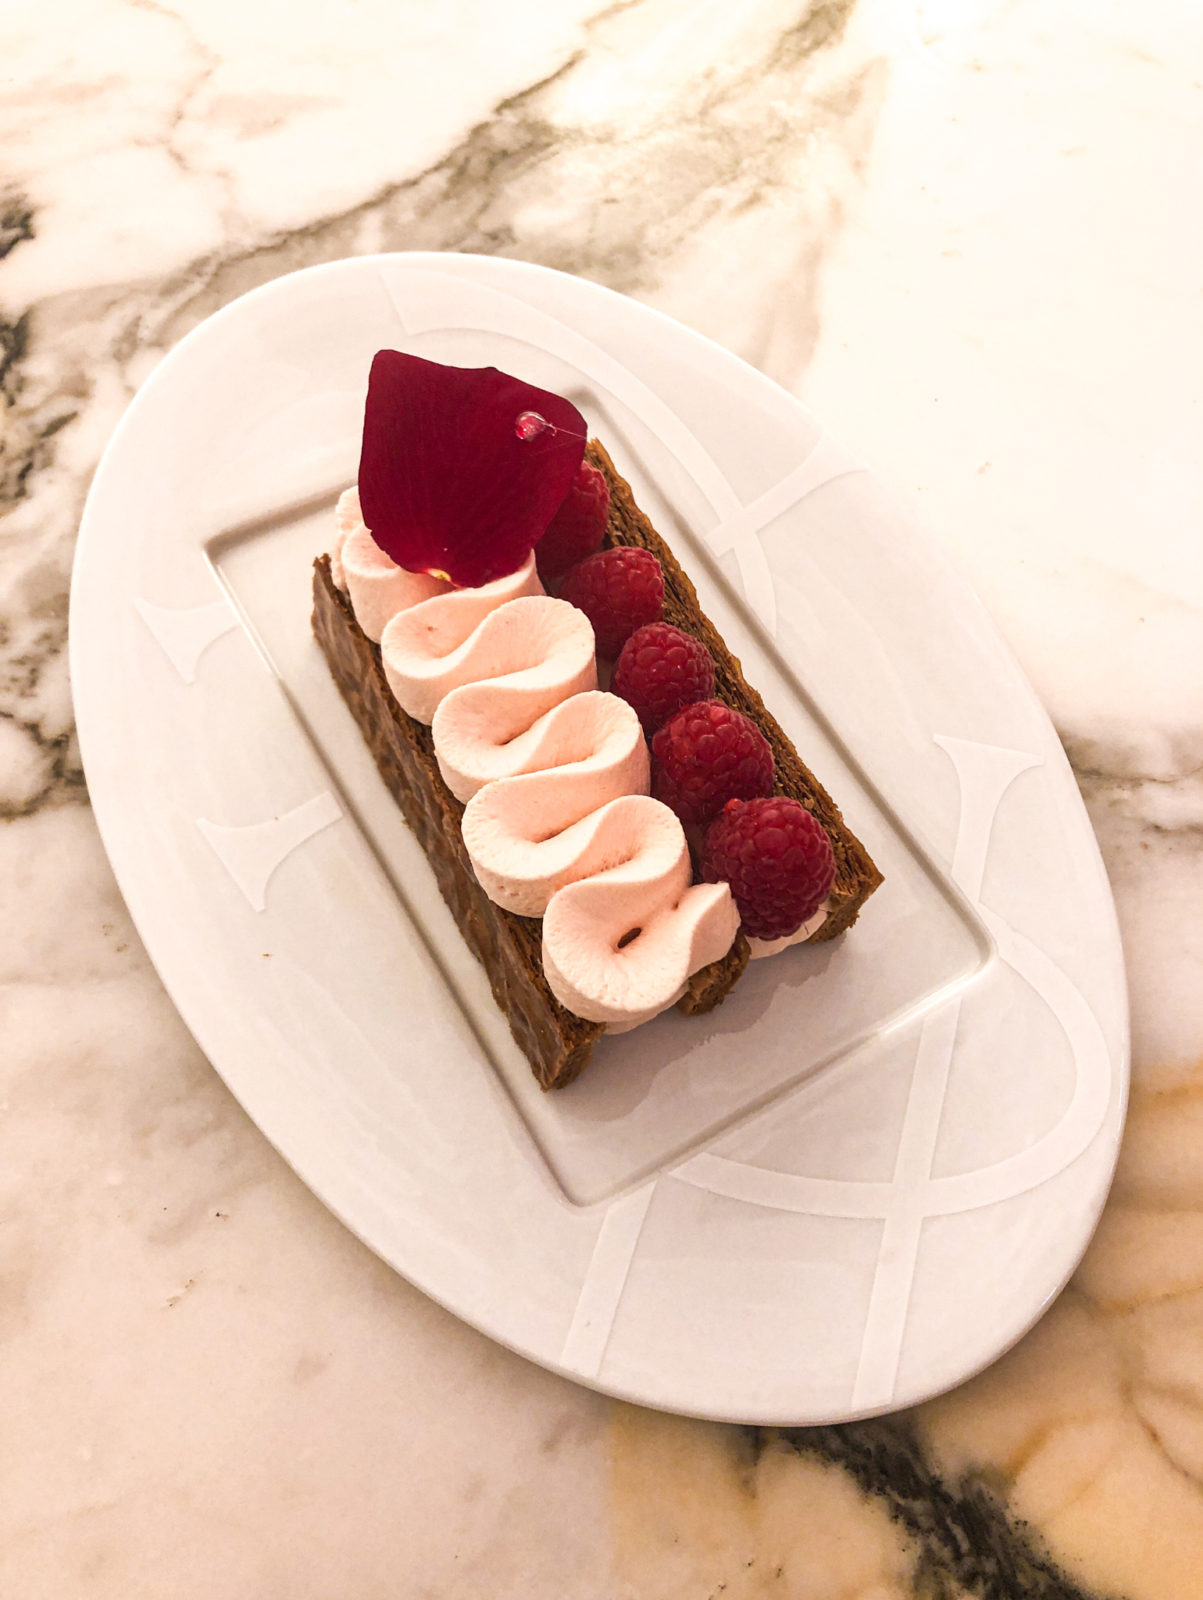 European dessert / French pastry "Mille Feuille Ispahan"